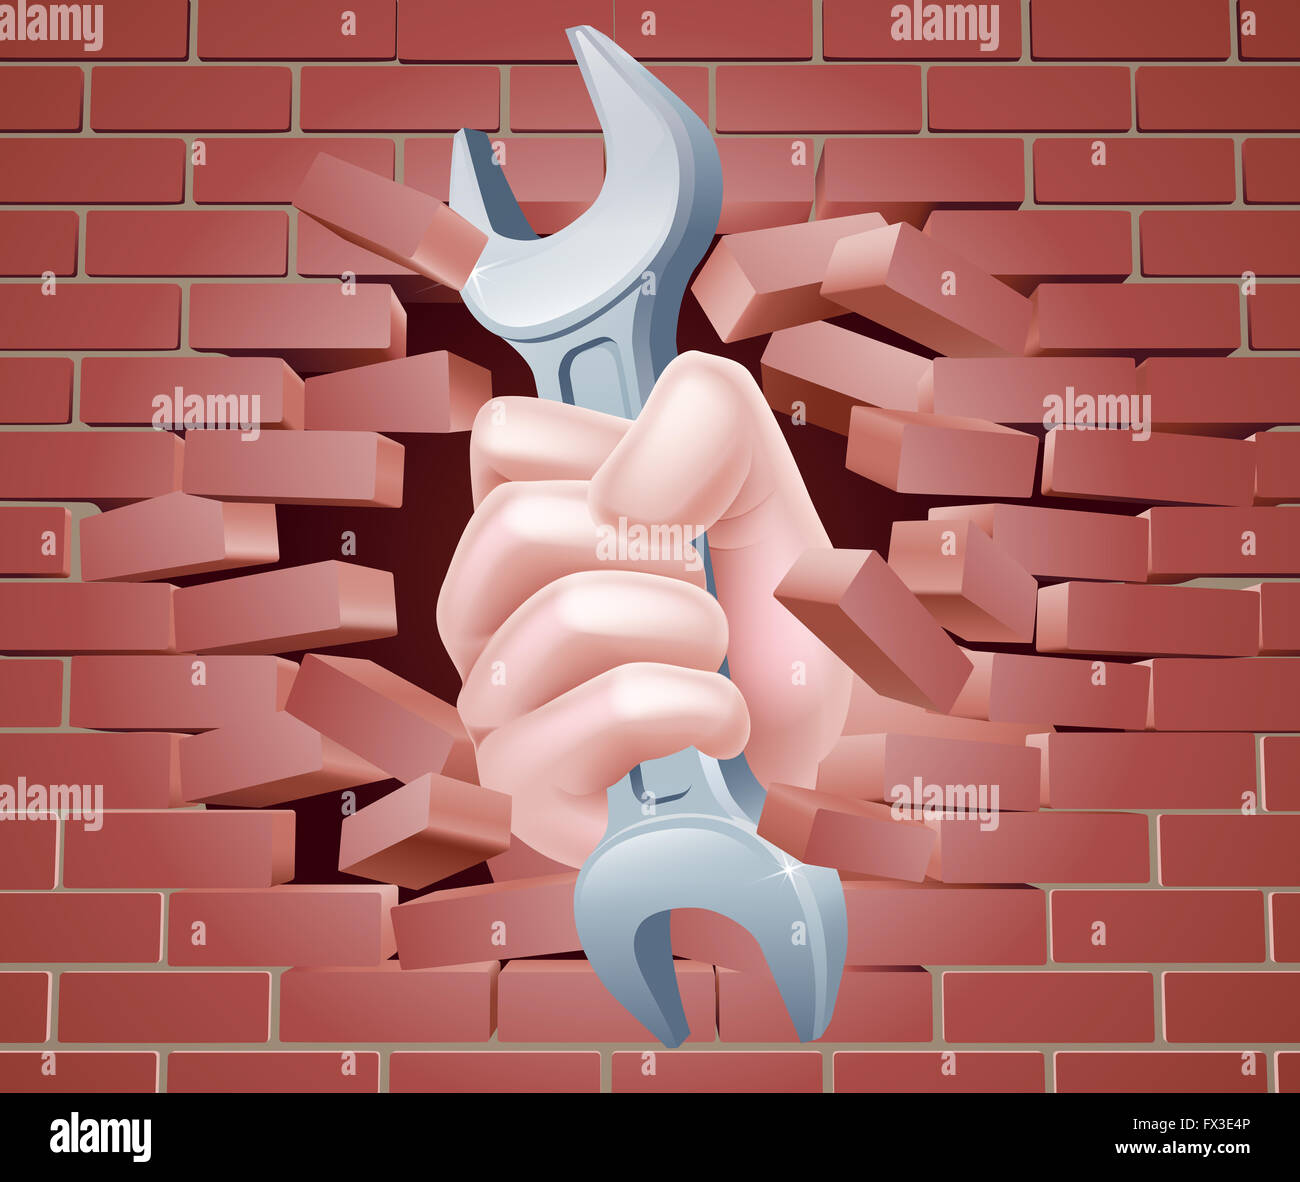 Conceptual illustration of a hand holding a spanner breaking through a brick wall Stock Photo